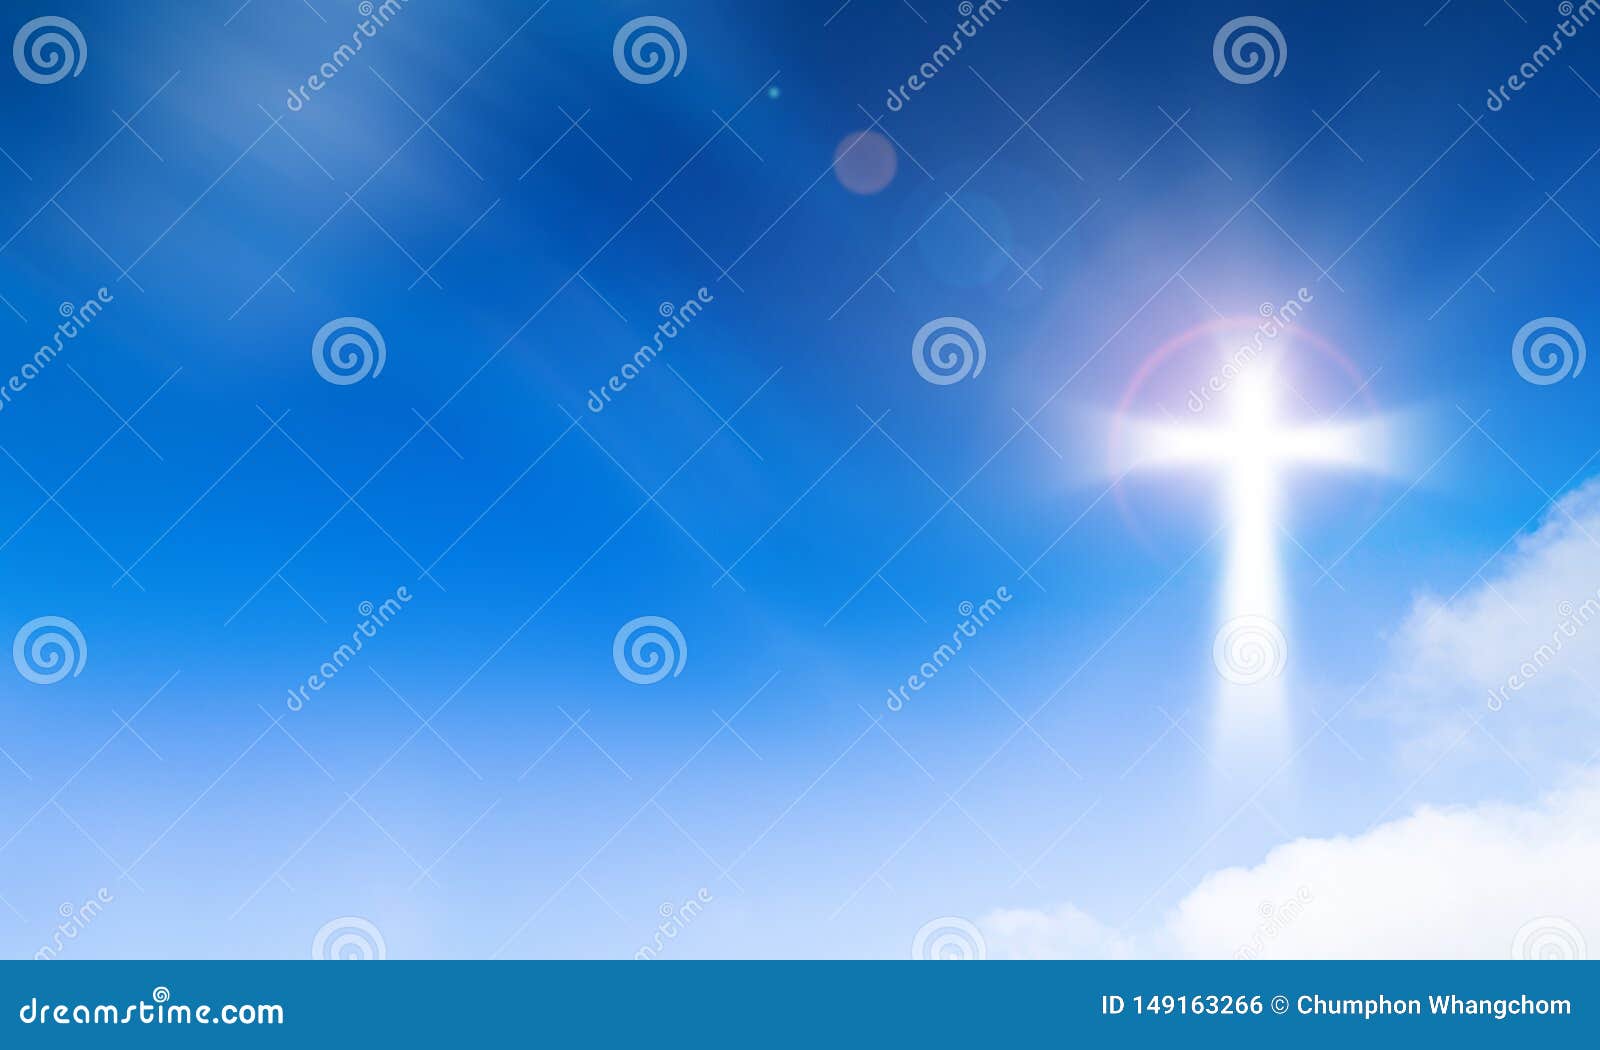 holy light of crucifix cross on blue sky background. hope and freedom concept